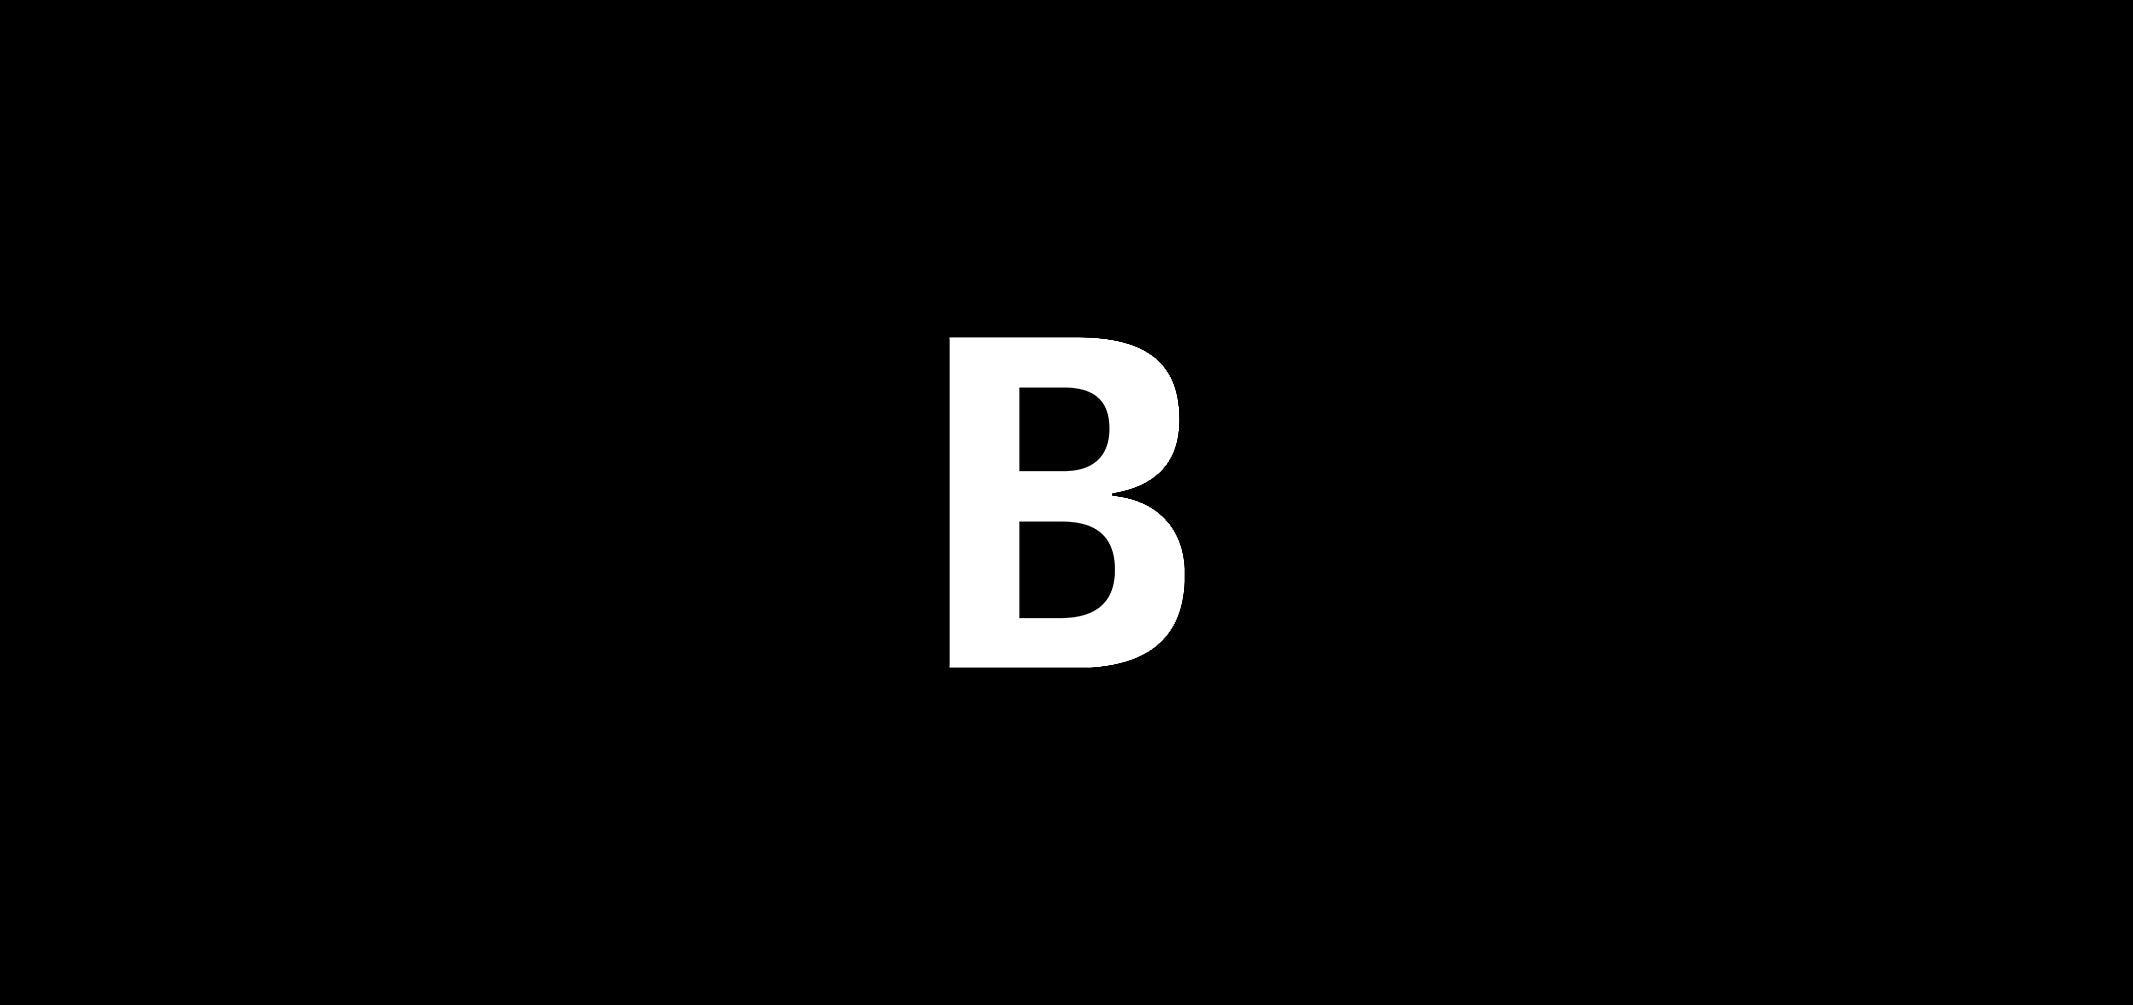 B Stands For?